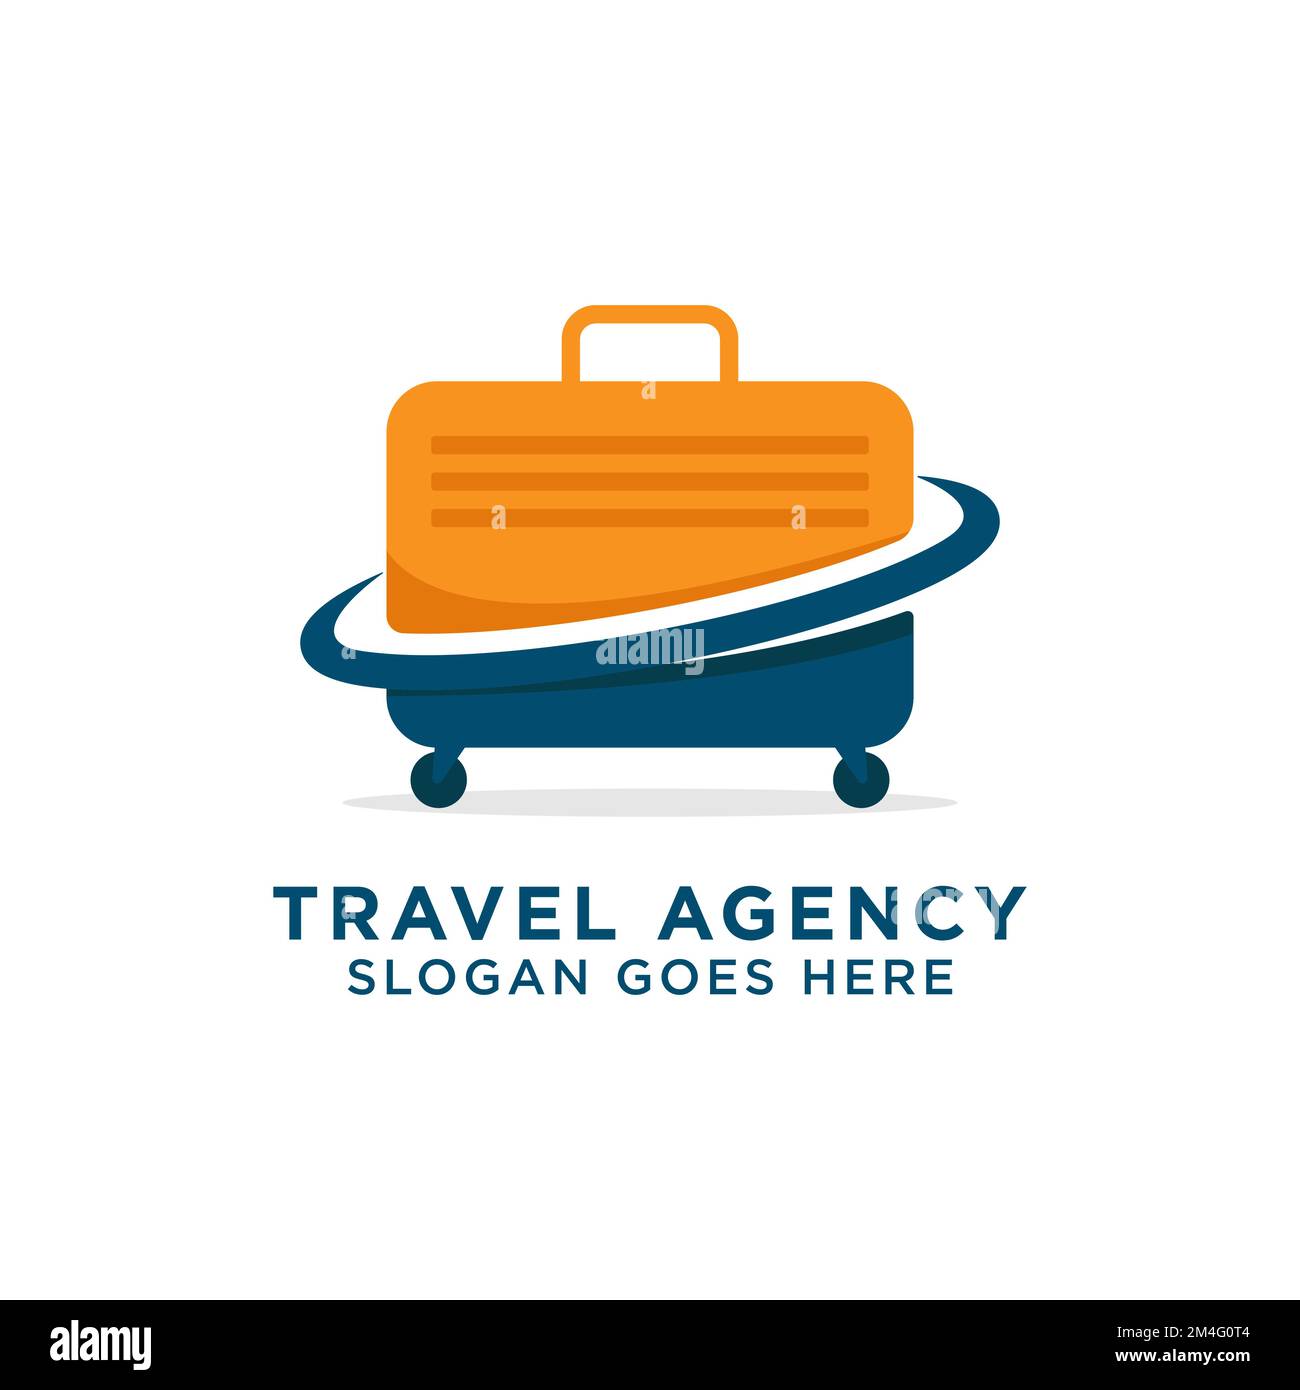 Travel agency logo design image, best for holiday, tourism, trip, vector illustration template Stock Vector